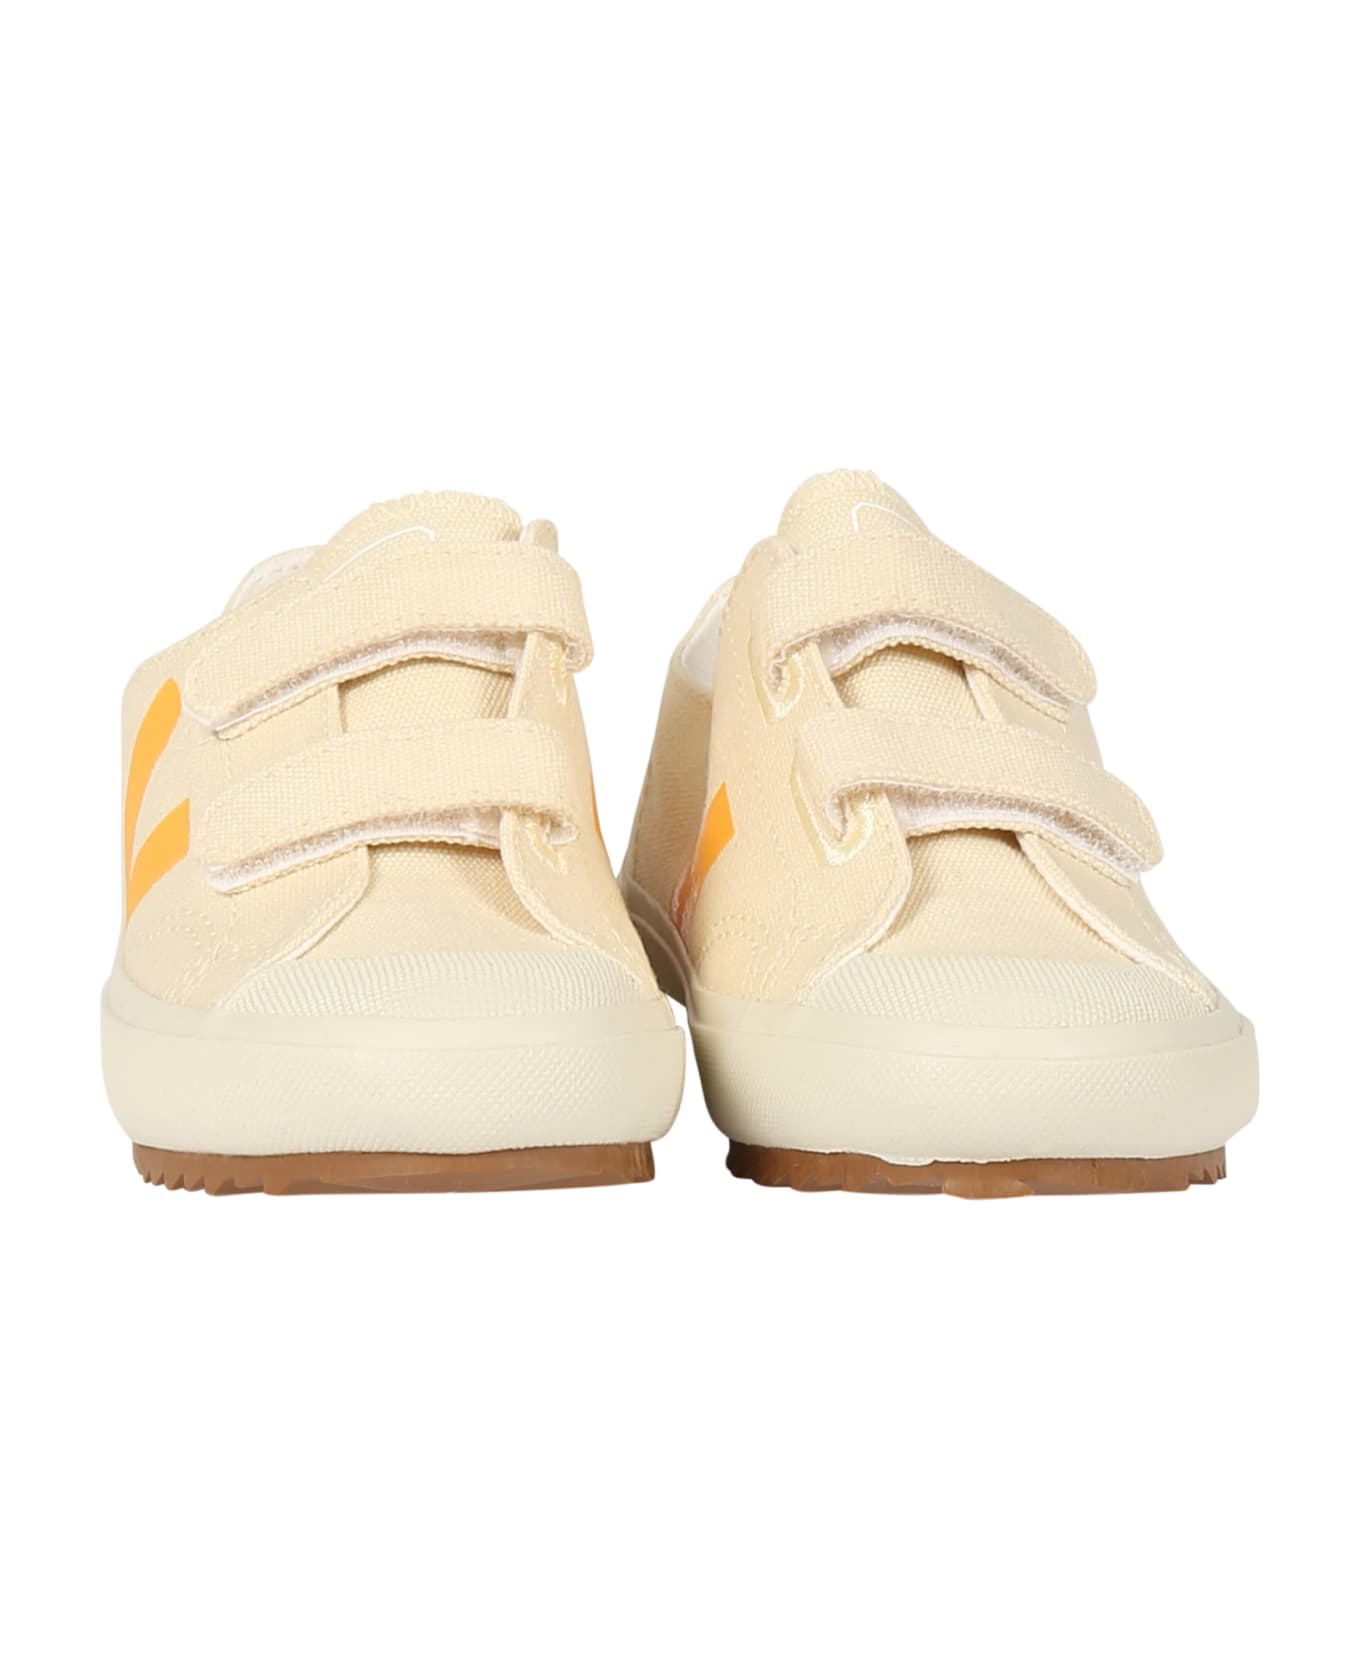 Veja Ivory Sneakers For Kids With Logo - Ivory シューズ